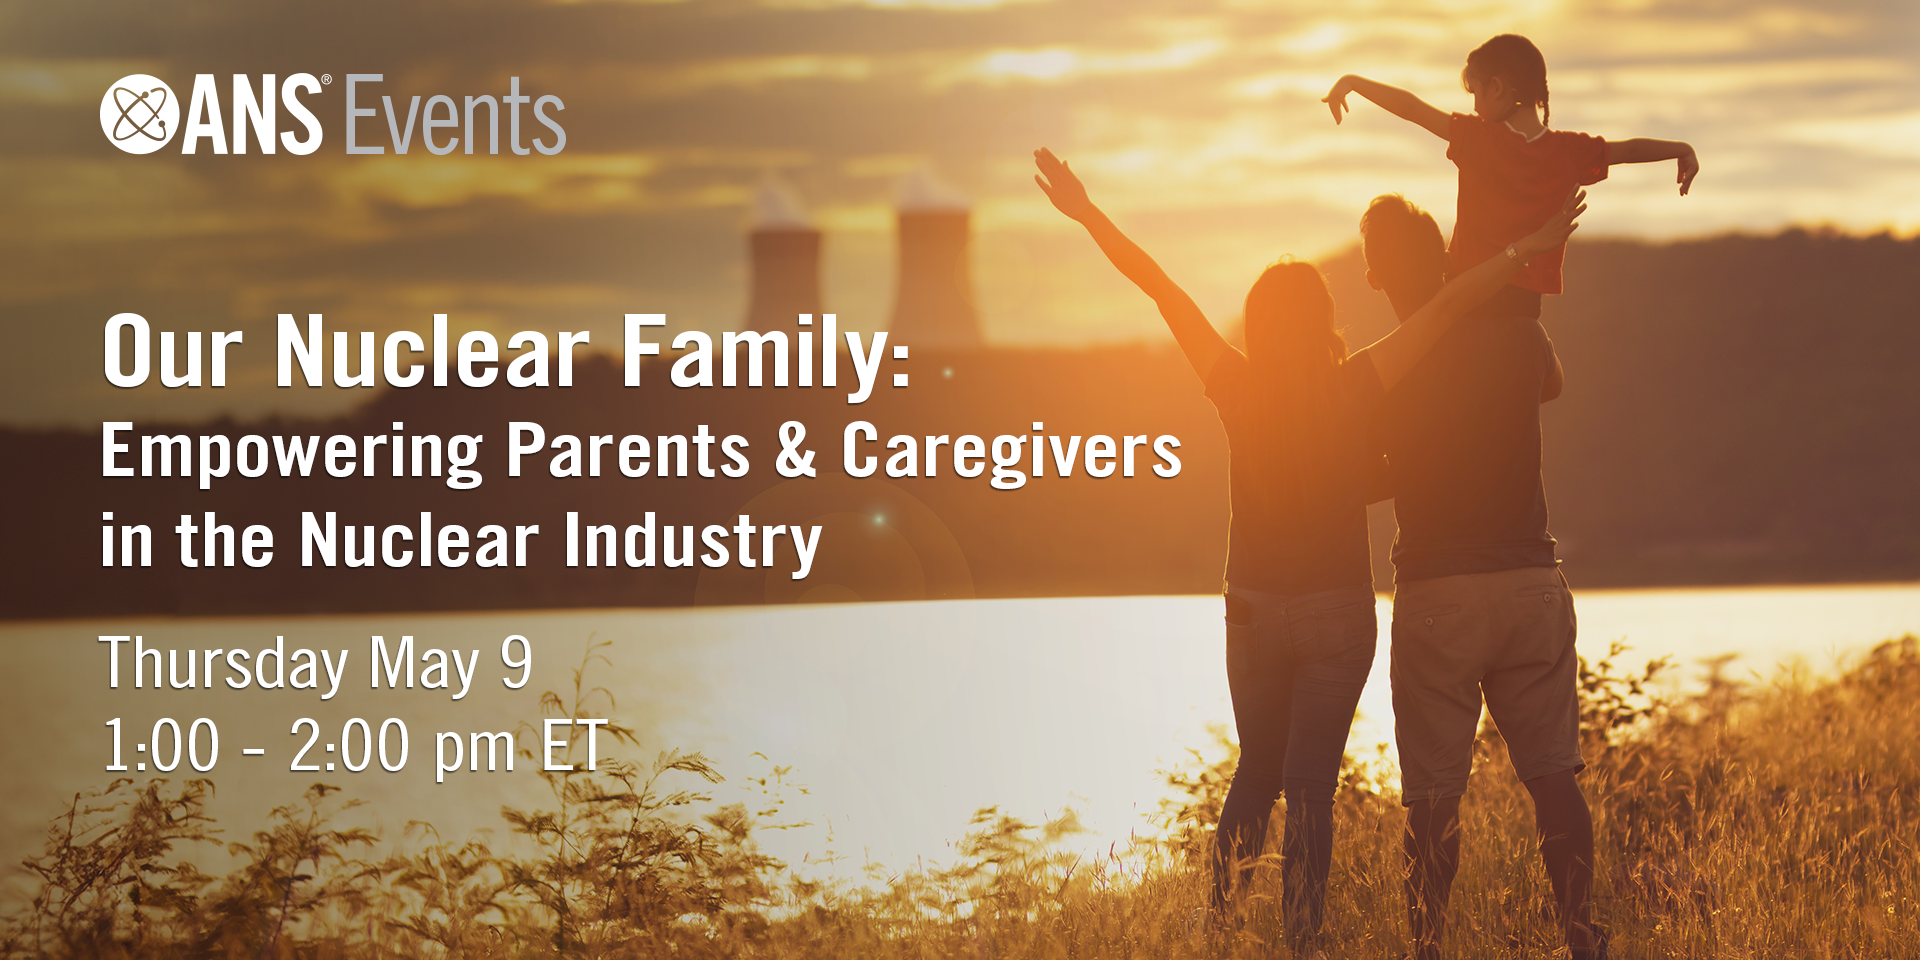 Join us for a discussion on raising a nuclear family